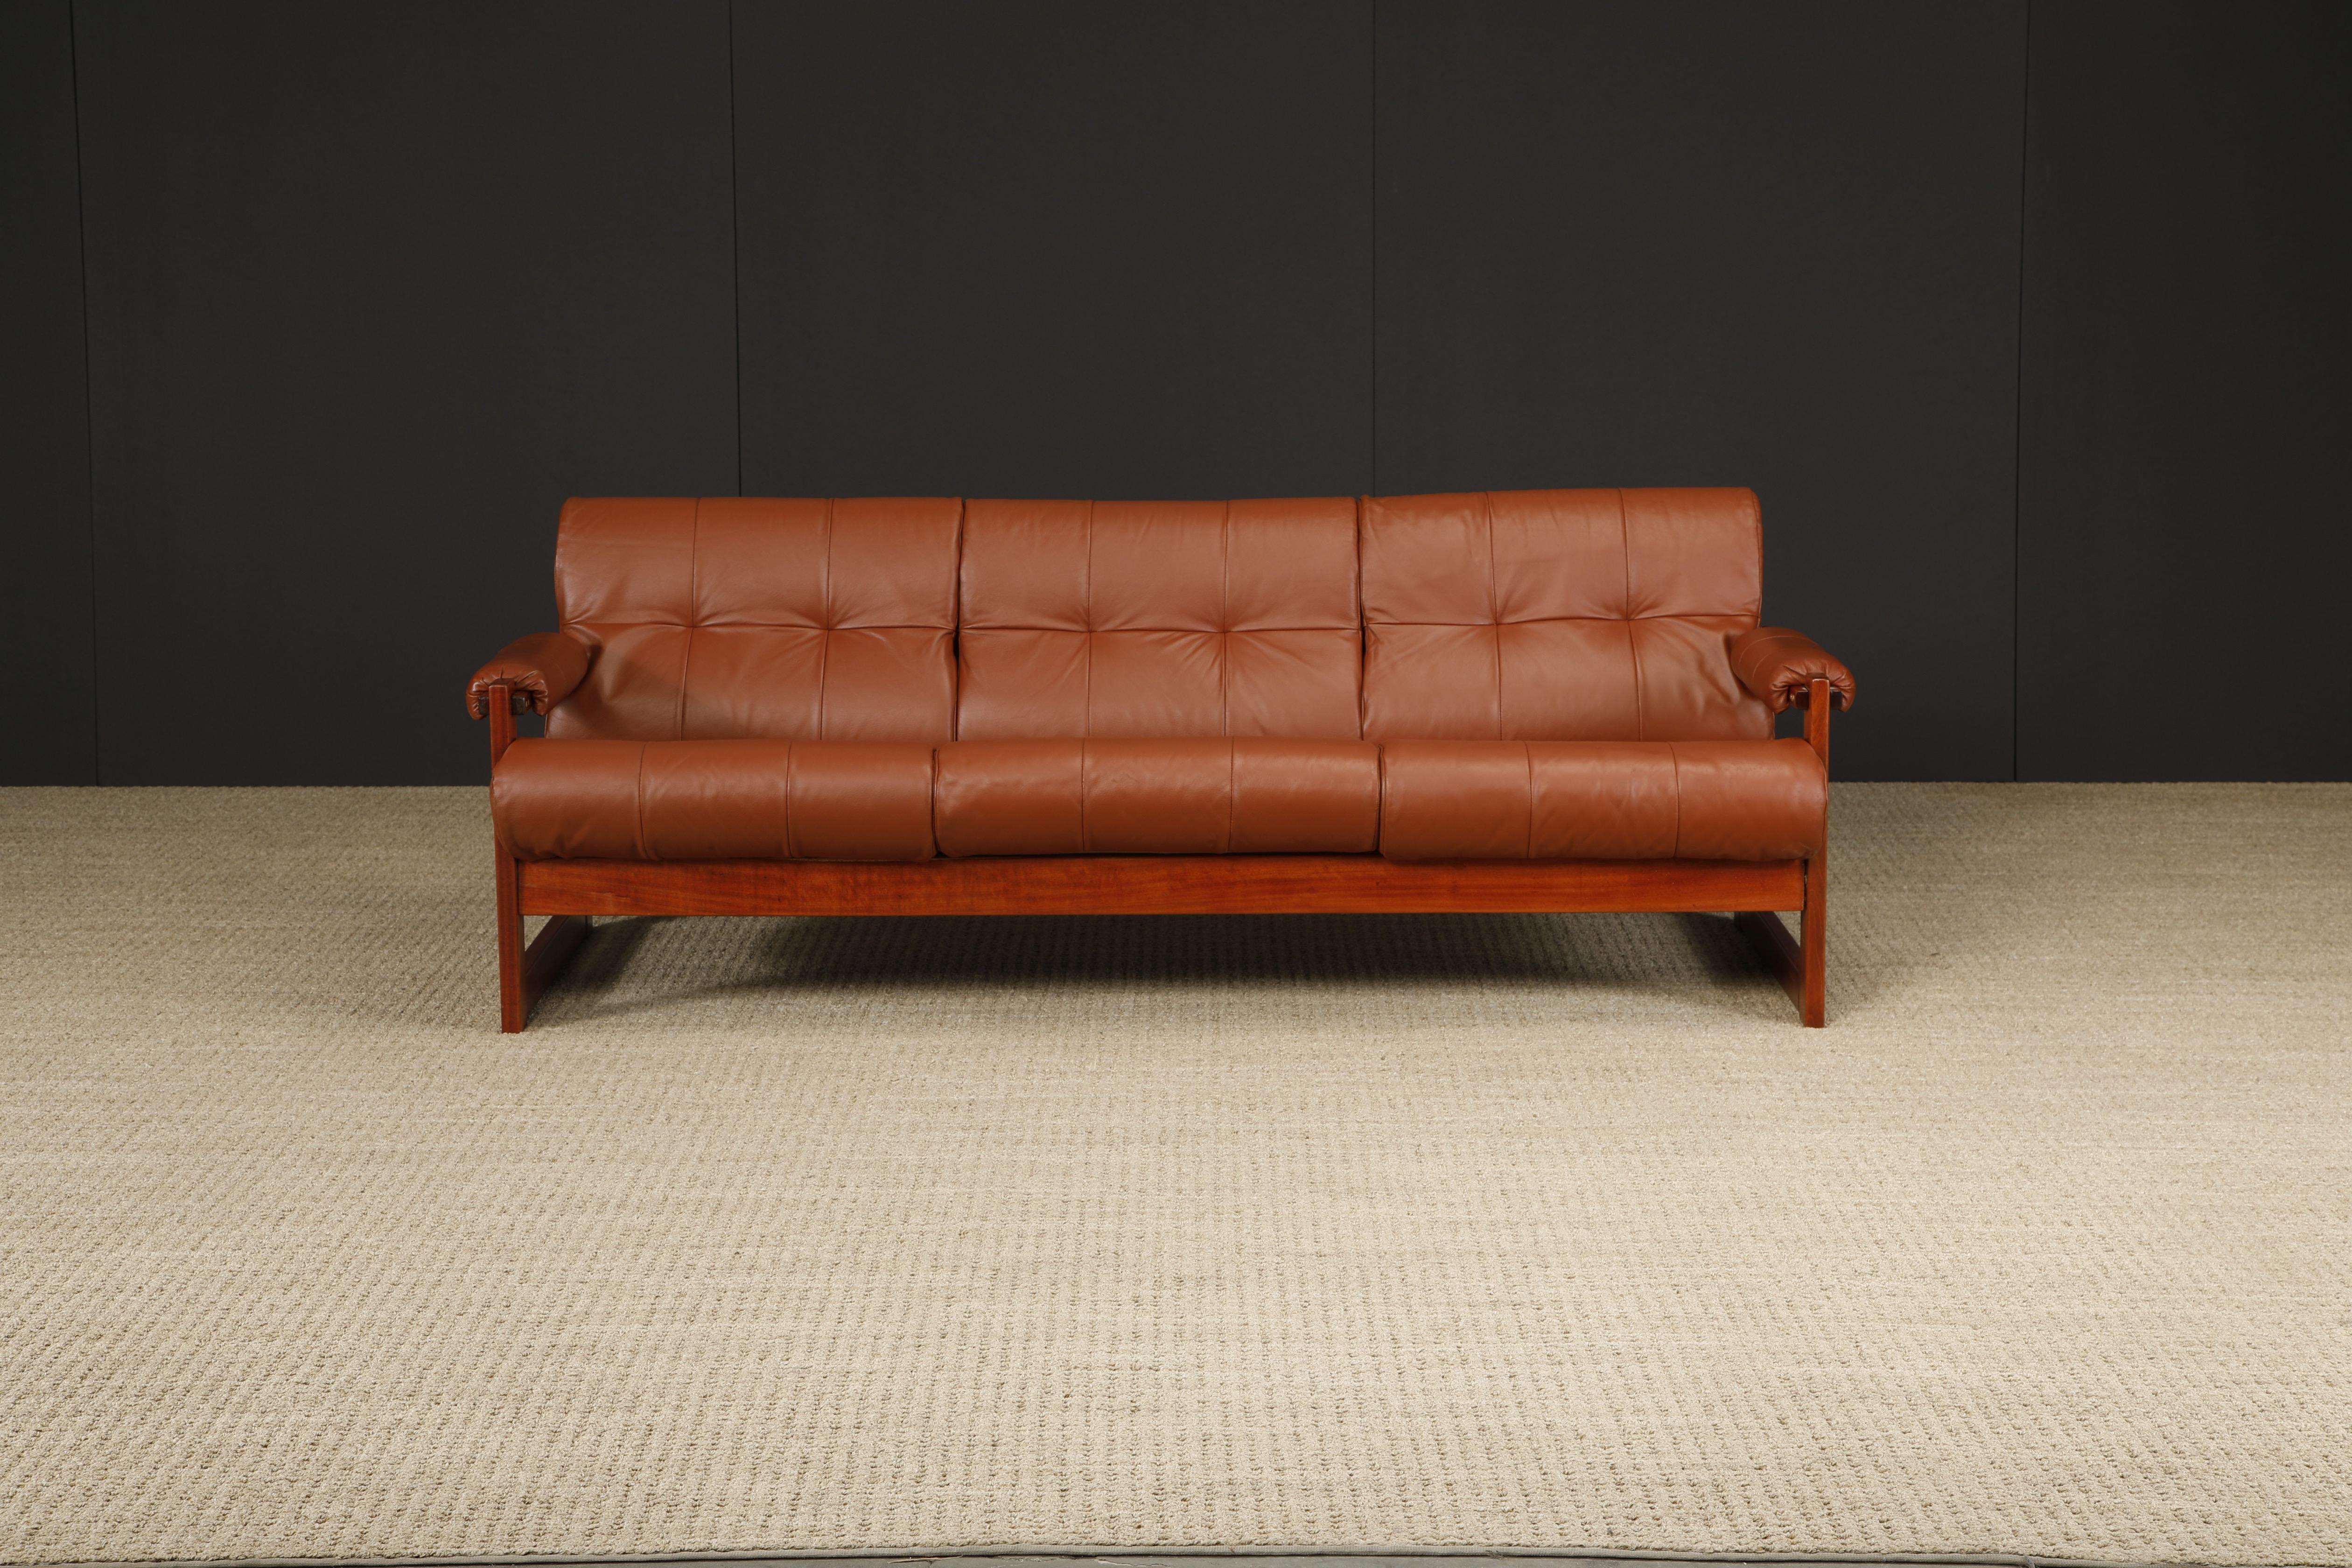 This gorgeous restored 'S-1' sofa by Brazilian designer Percival Lafer for Lafer MP. This sofa was designed in 1976 and was Lafer's concept of merging Brazilian design with Scandinavian sensibility - the sling seat cushions are made of molded foam